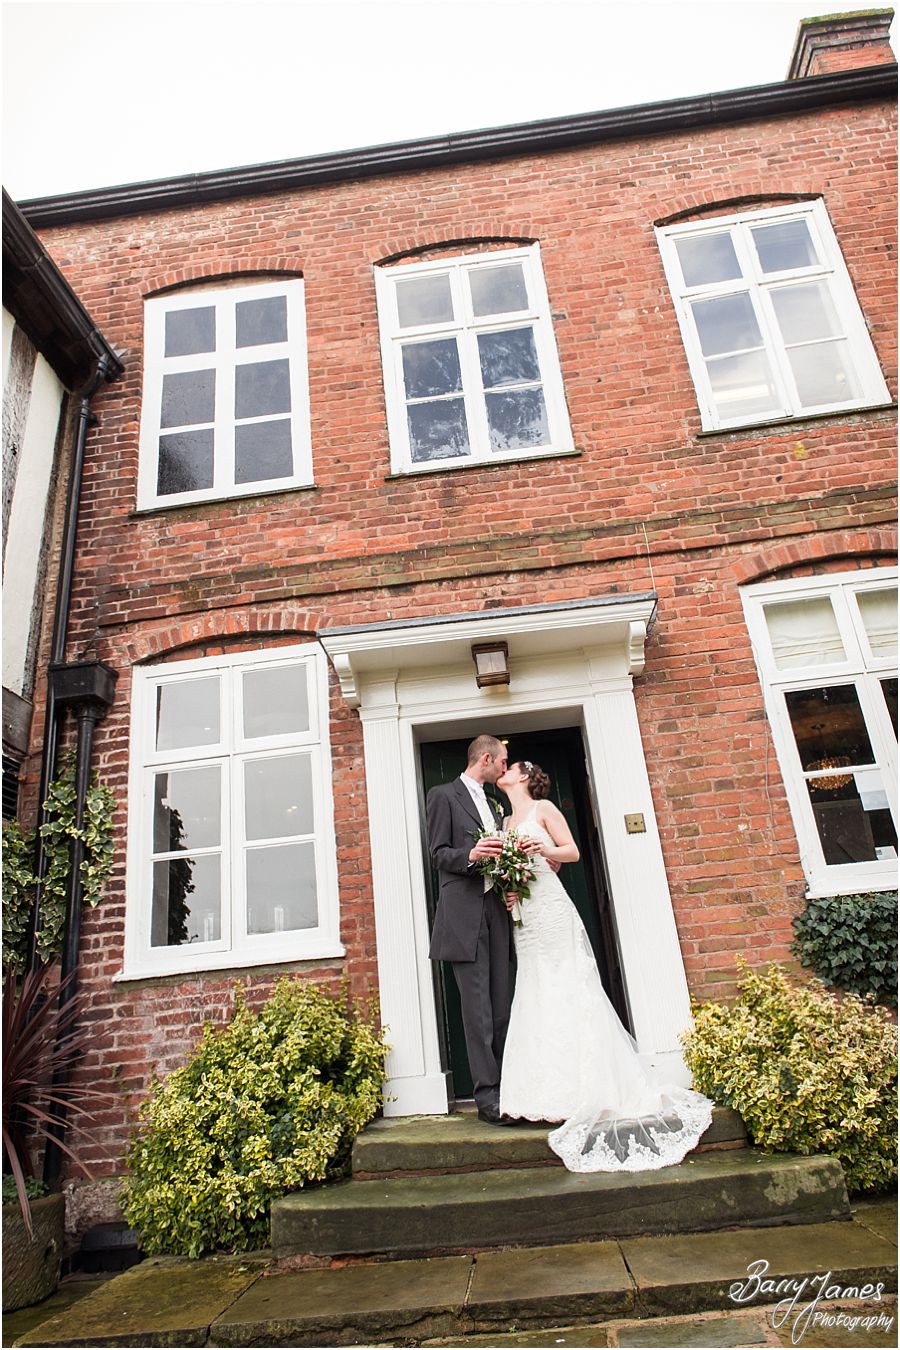 Creative contemporary wedding photographs at The Moat House in Acton Trussell by Professional Wedding Photographer Barry James